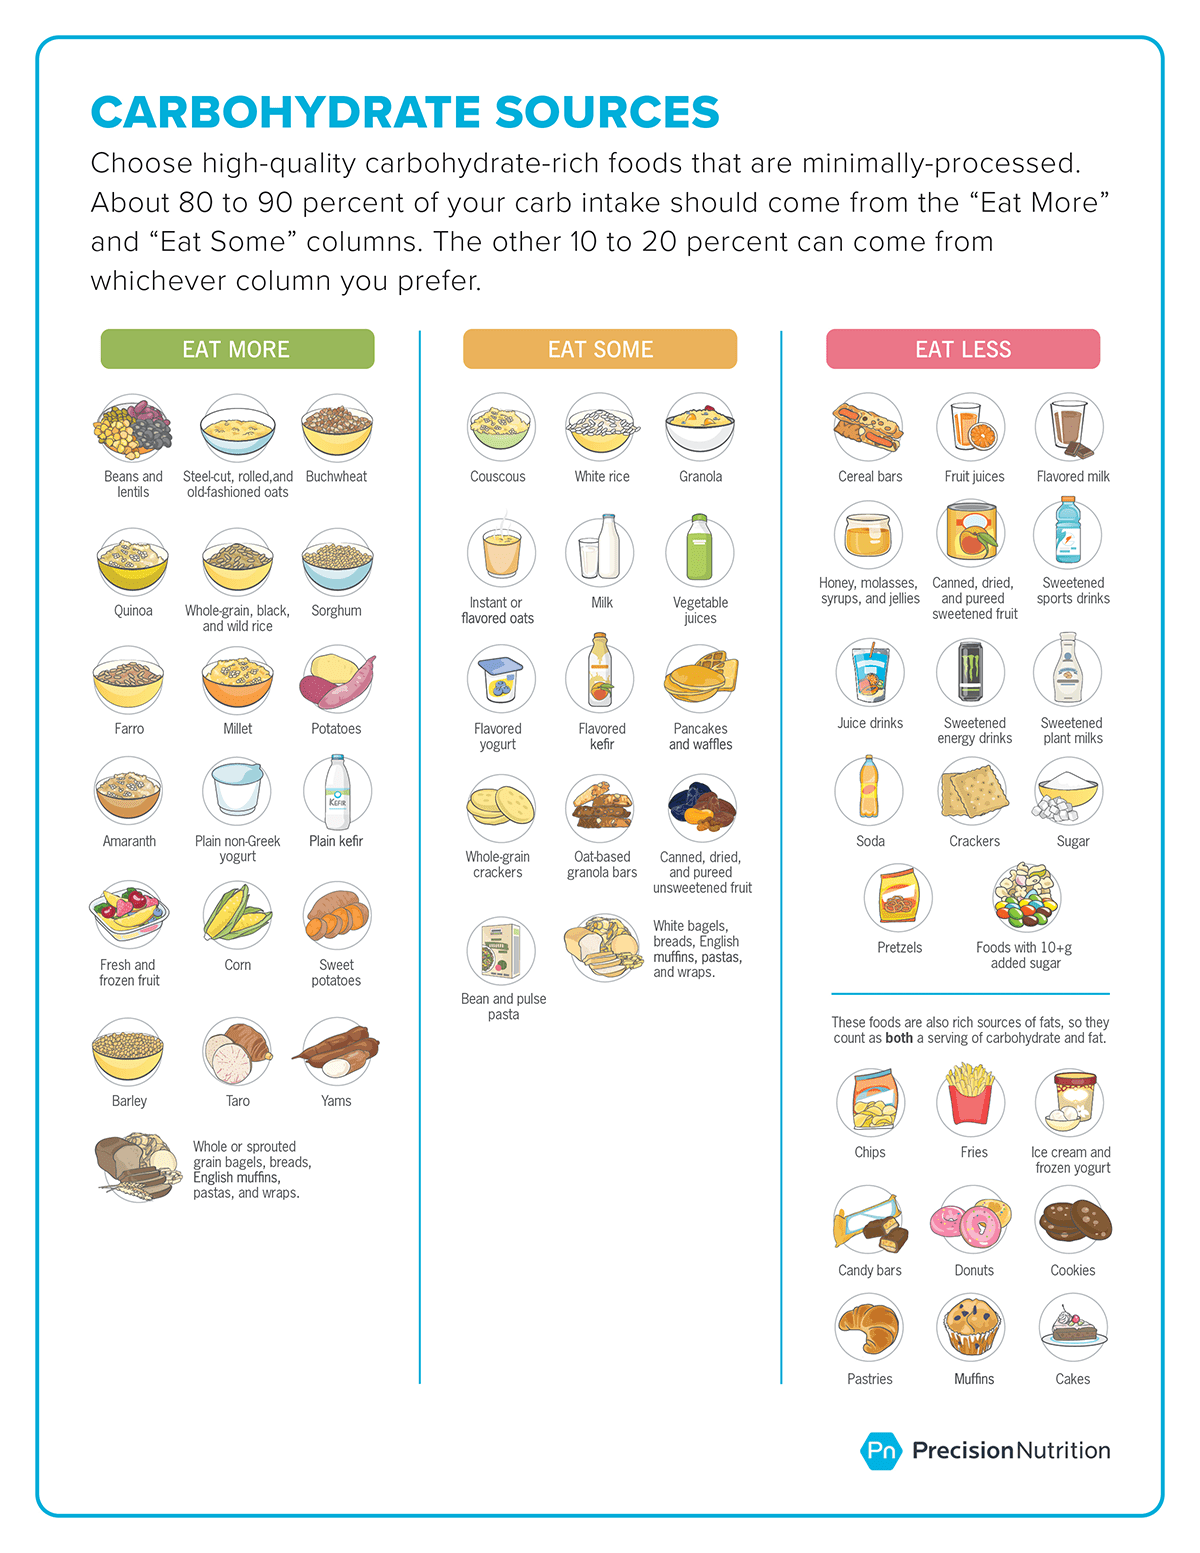 This sports nutrition food list provides the best carbohydrate foods for athletes. It categorizes carbs into “Eat More,” “Eat Some,” and “Eat Less.” You should choose high-quality carbohydrate-rich foods that are minimally-processed. Your goal: Most of your carbohydrate intake—about 80 to 90 percent—should come from the “Eat More” and “Eat Some” columns. The other 10 to 20 percent can come from whichever column you prefer. The “Eat More” carbohydrate food list includes: beans and lentils, steel-cut, rolled, and old-fashioned oats, buckwheat, quinoa, whole-grain, black, and wild rice, sorghum, farro, millet, potatoes, amaranth, plain non-Greek yogurt, plain kefir, fresh and frozen fruit, corn, sweet potatoes, barley, taro, yams, whole or sprouted grain bagels, breads, English muffins, pastas, and wraps. The “Eat Some” carbohydrate food list includes: couscous, white rice, granola, instant or flavored oats, milk, vegetable juices, flavored yogurt, flavored kefir, pancakes and waffles, whole-grain crackers, oat-based granola bars, canned, dried, and pureed unsweetened fruit, bean and pulse pasta, white bagels, breads, English muffins, pastas, and wraps. The “Eat Less” carbohydrate food list includes: cereal bars, fruit juices, flavored milk honey, molasses, syrups, and jellies, canned, dried, and pureed sweetened fruit, sweetened sports drinks, juice drinks, sweetened energy drinks, sweetened plant milks, soda, crackers, sugar, pretzels, foods with 10+ grams of added sugar. The following foods are in the “Eat Less” category and are also a rich source of fats, so they count as both a serving of carbohydrate and fat: chips, fries, ice cream and frozen yogurt, candy bars, donuts, cookies, pastries, muffins, and cakes.